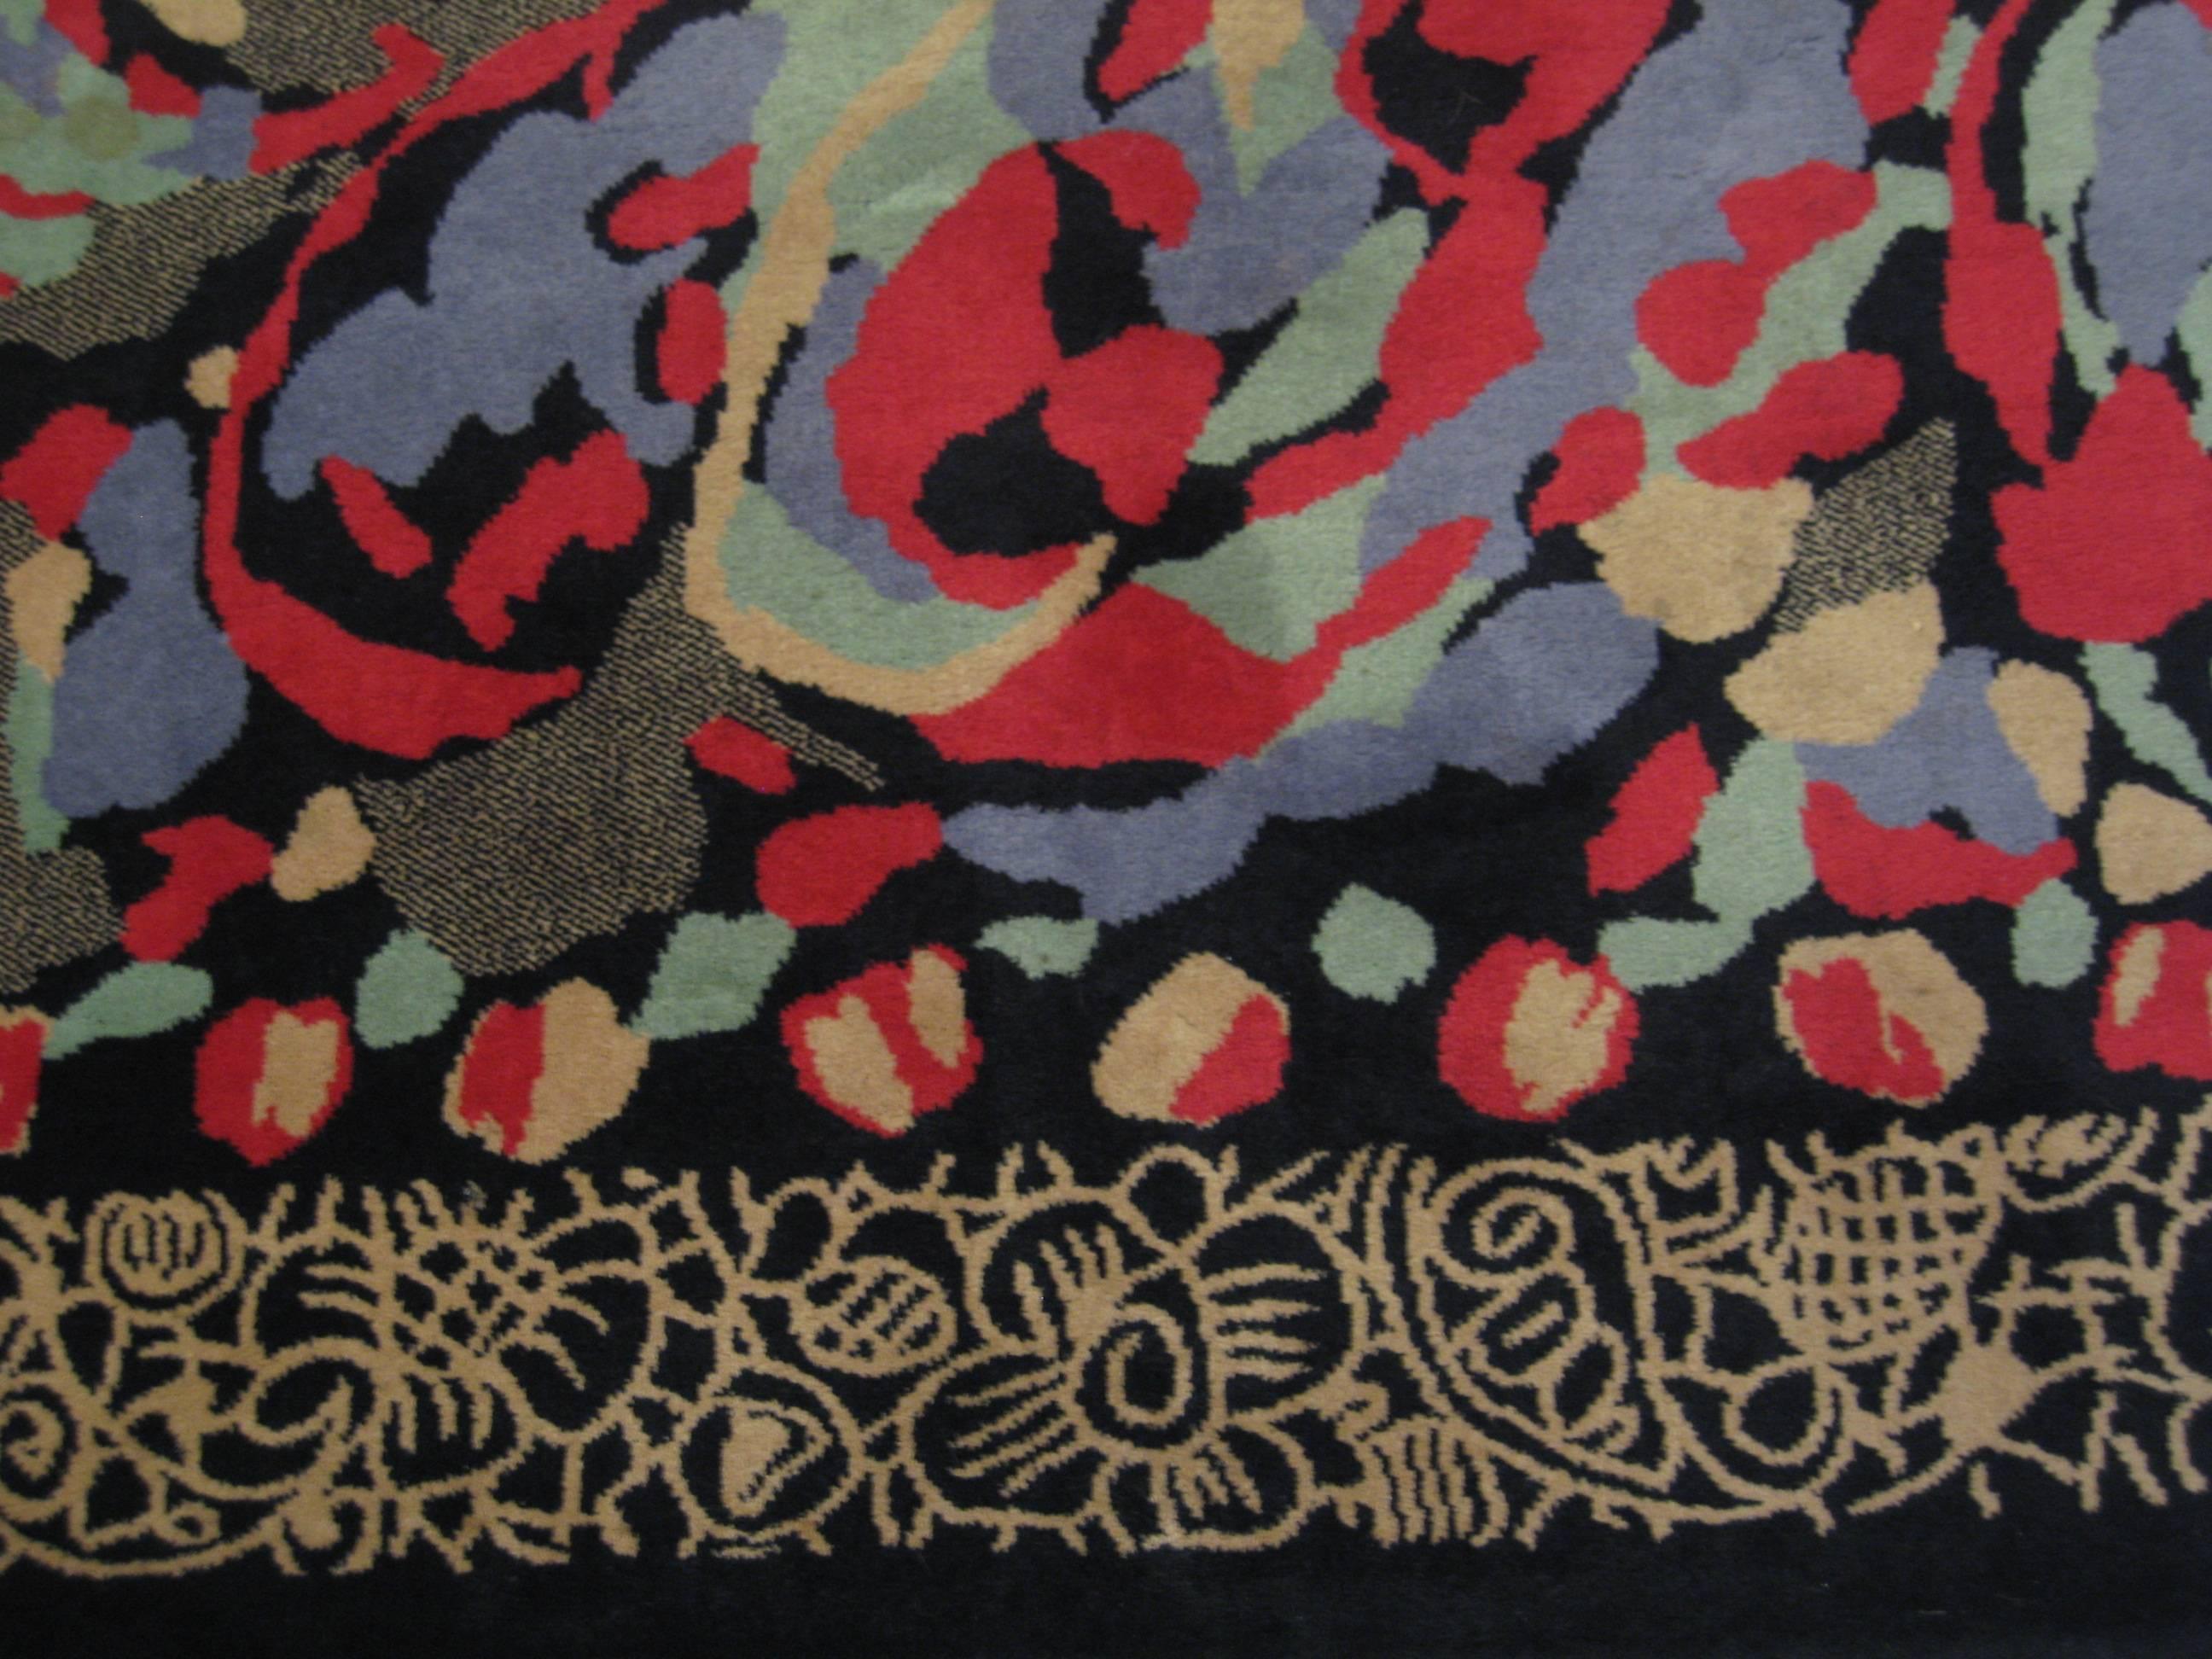 A Pierre Balmain designed modernist wool carpet.
Composed of a black background with a decorative tan border
surrounding the central composition of the carpet in Hughes of red, blue, green and tan.
Featuring the original label: 